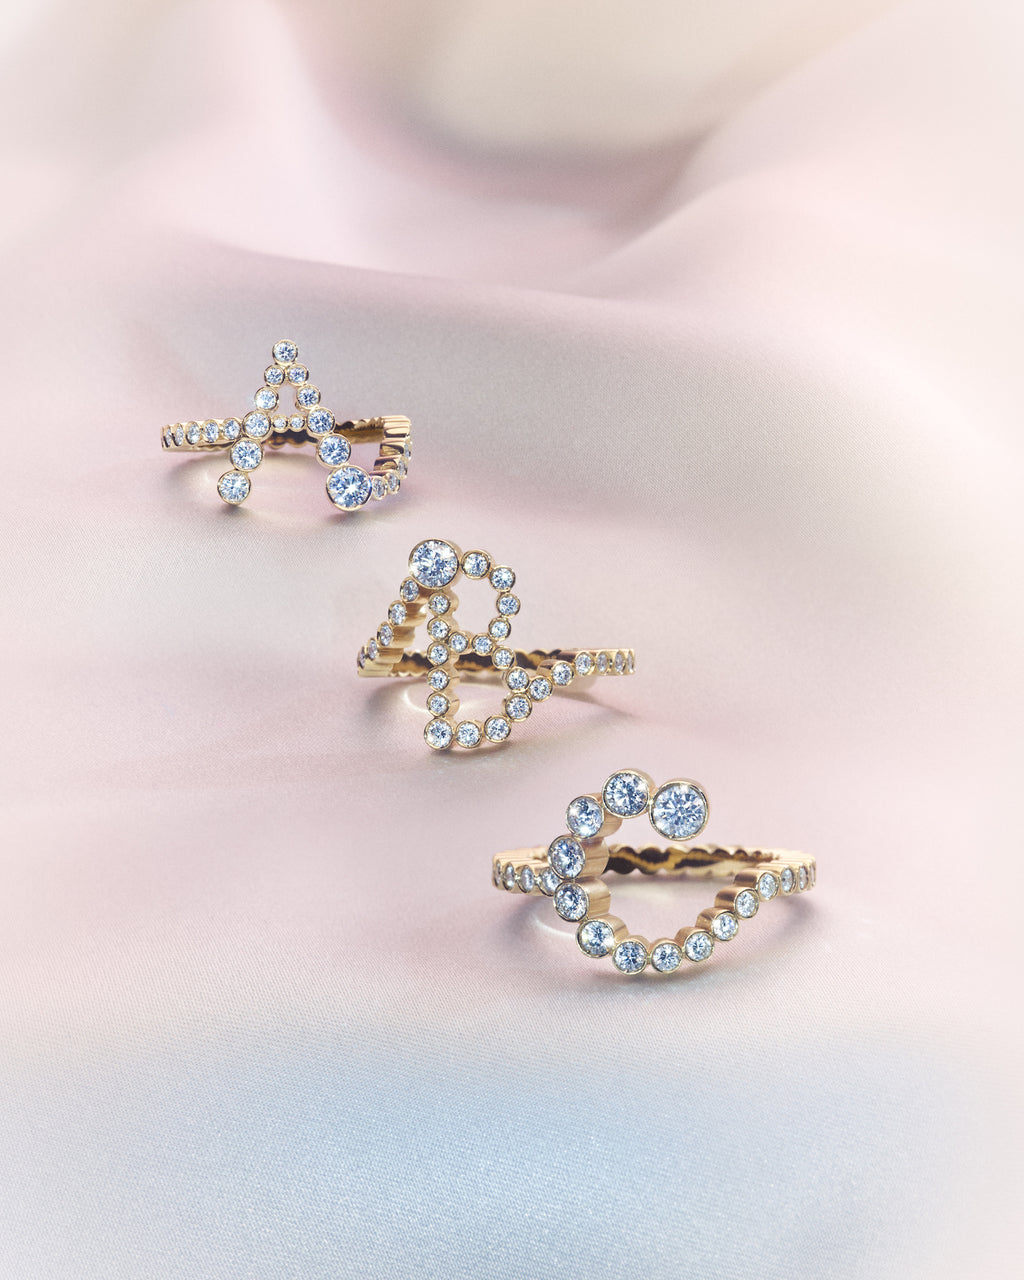 Three 18K yellow gold diamond rings shaped in the letters 'A', 'B' and 'C' on a soft pink background